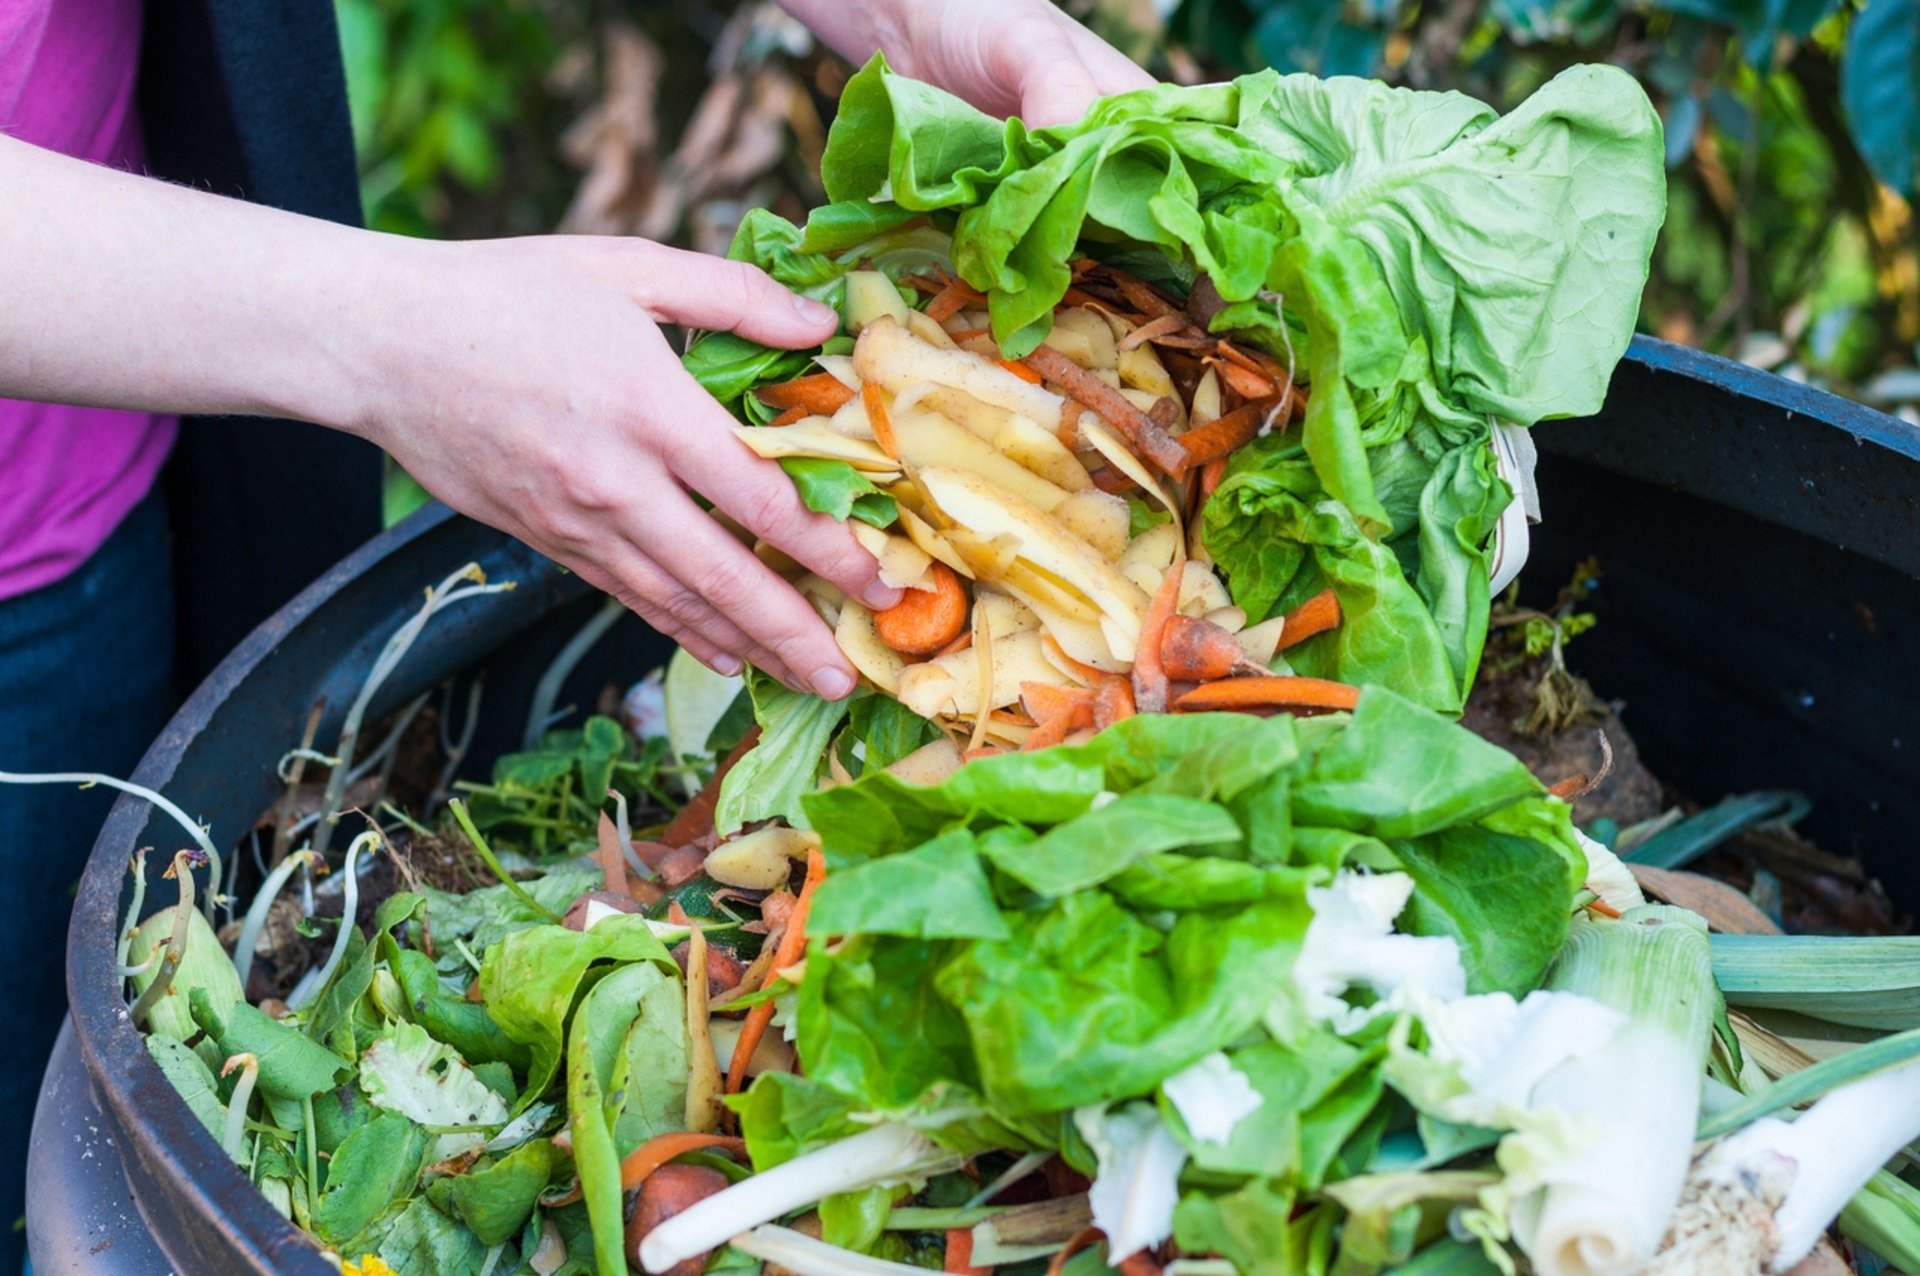 Food Waste Is a Massive Problem—Here's Why - FoodPrint